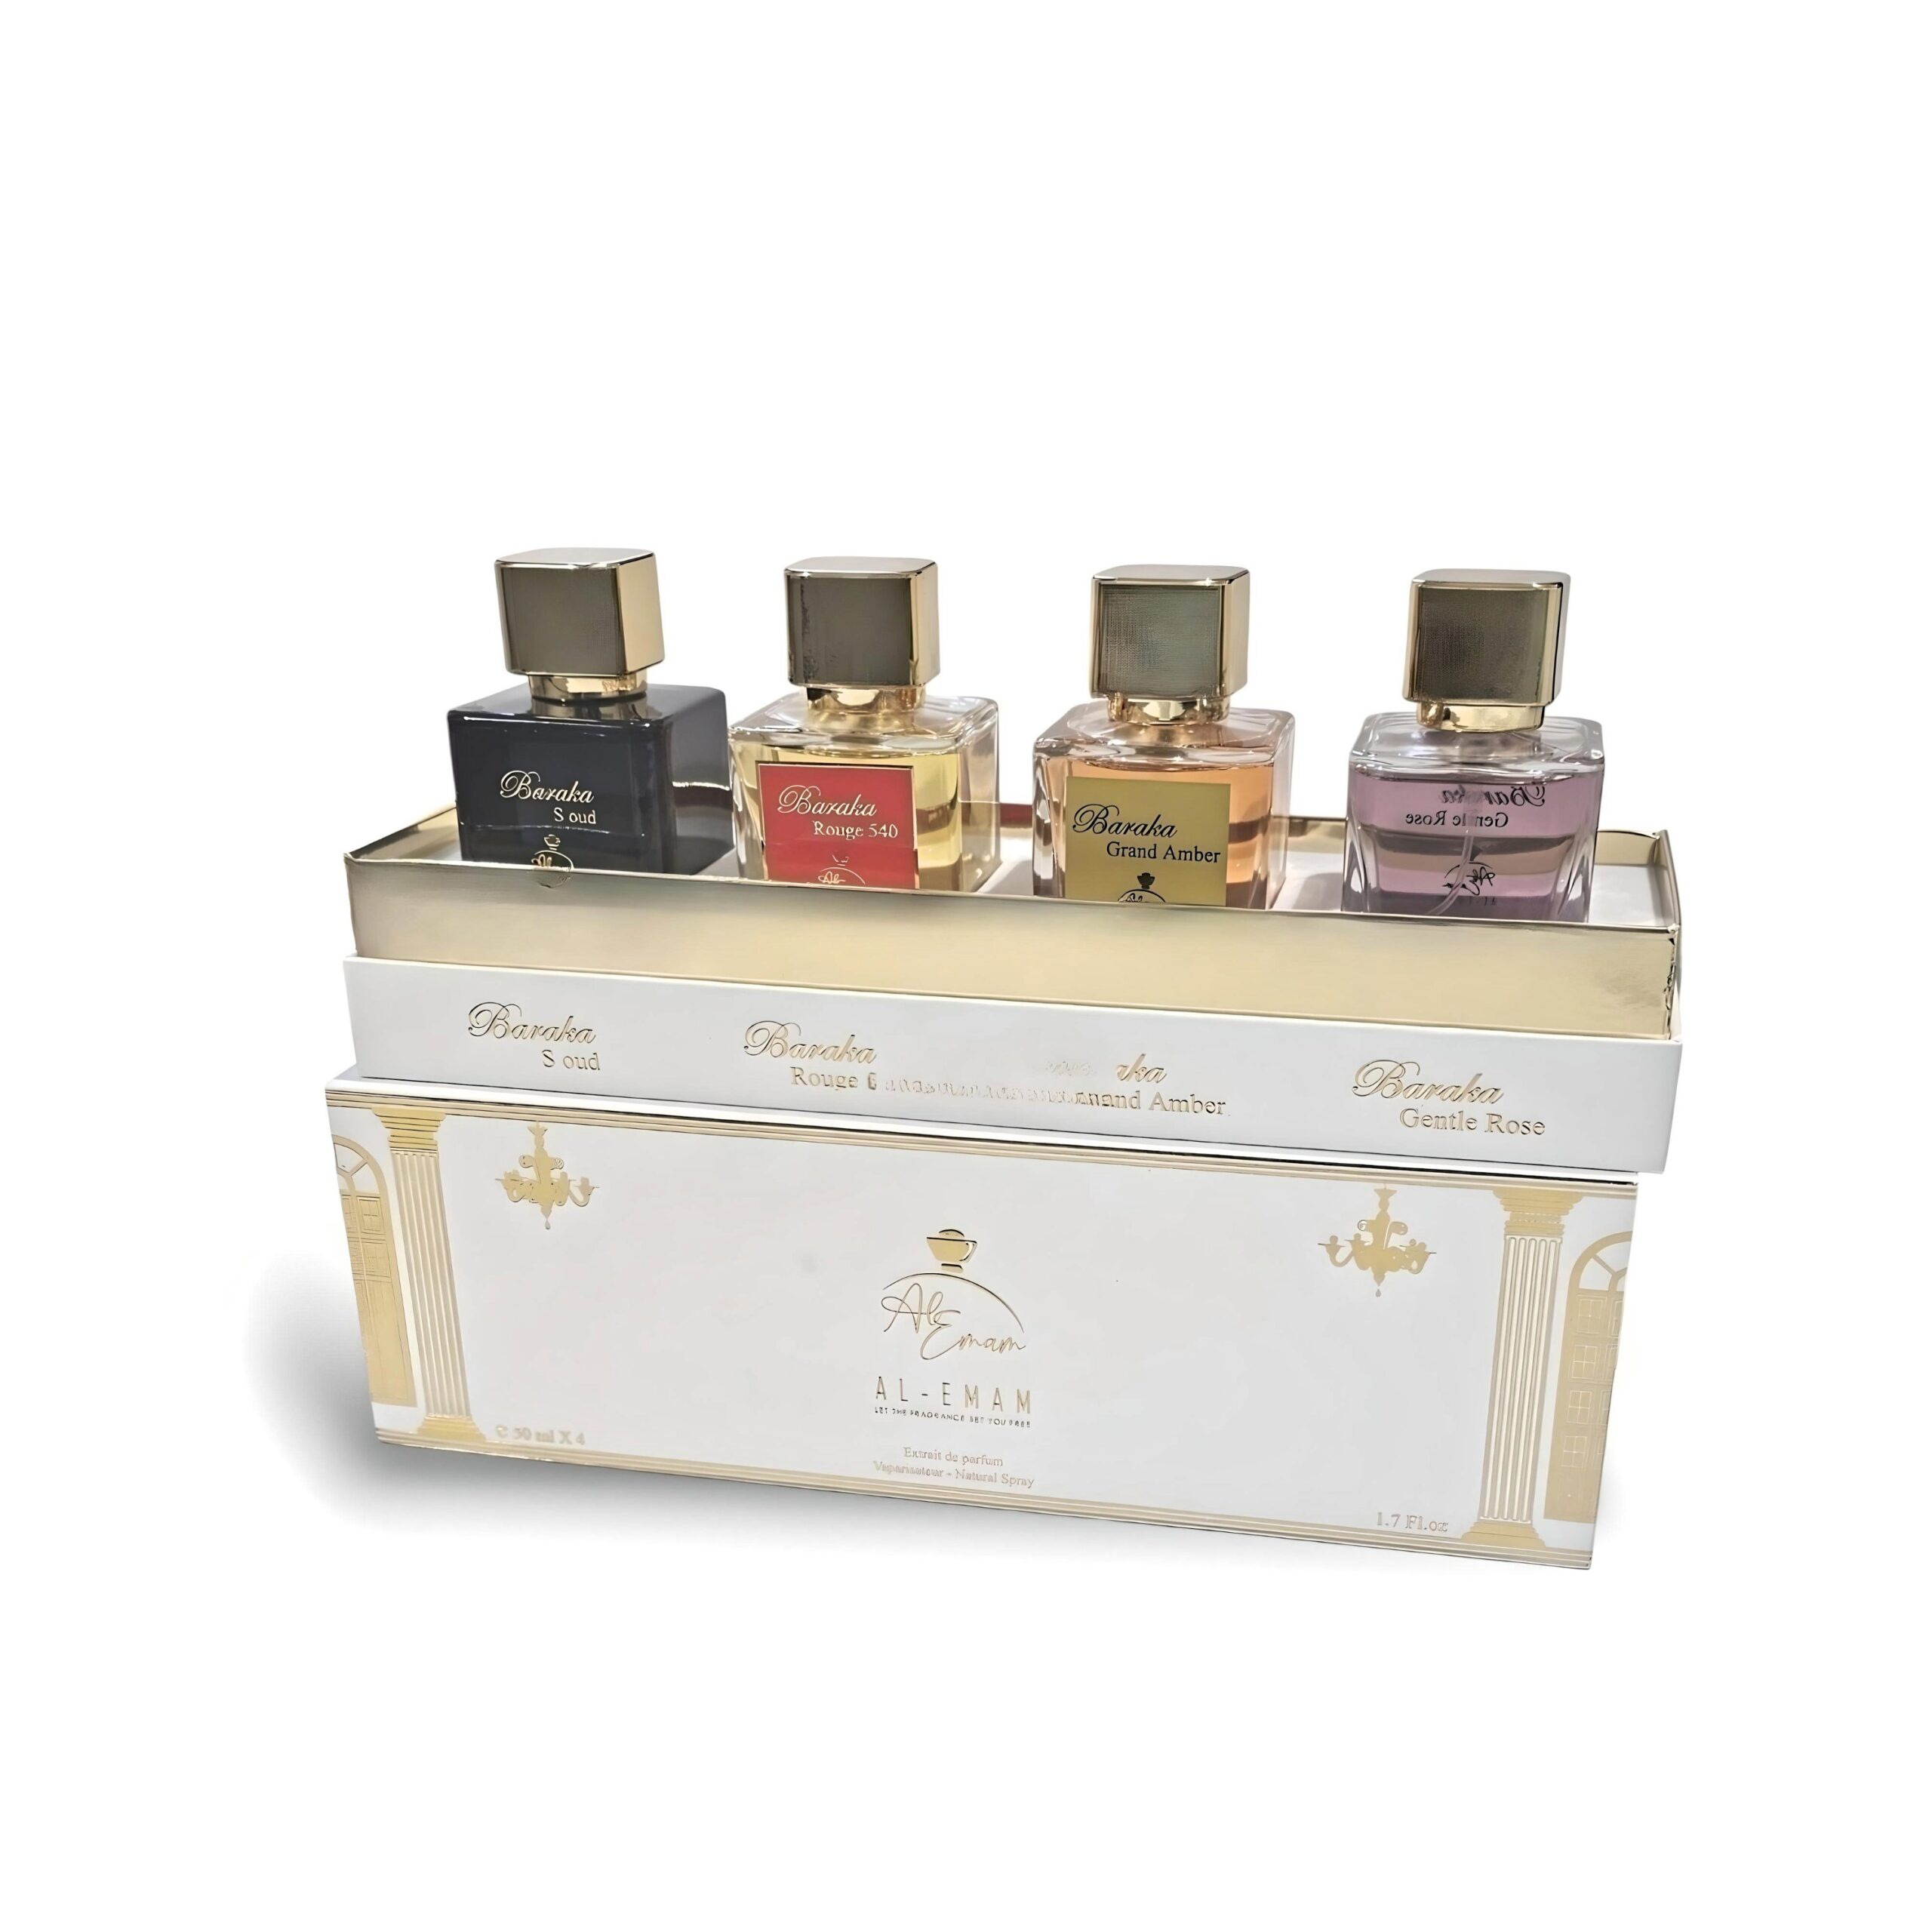 1000043518 Scaled Al-Emam White 4 Piece Perfume Gift Set (4 X 50Ml Extrait De Parfum), Indulge In The Al-Emam Collection, A Quartet Of Perfumes That Are As Nuanced As Captivating. Each 50Ml Bottle Offers A Unique Olfactory Journey, Crafted To Stir The Senses And Leave A Lasting Impression. Soghaat Gifts &Amp; Fragrances